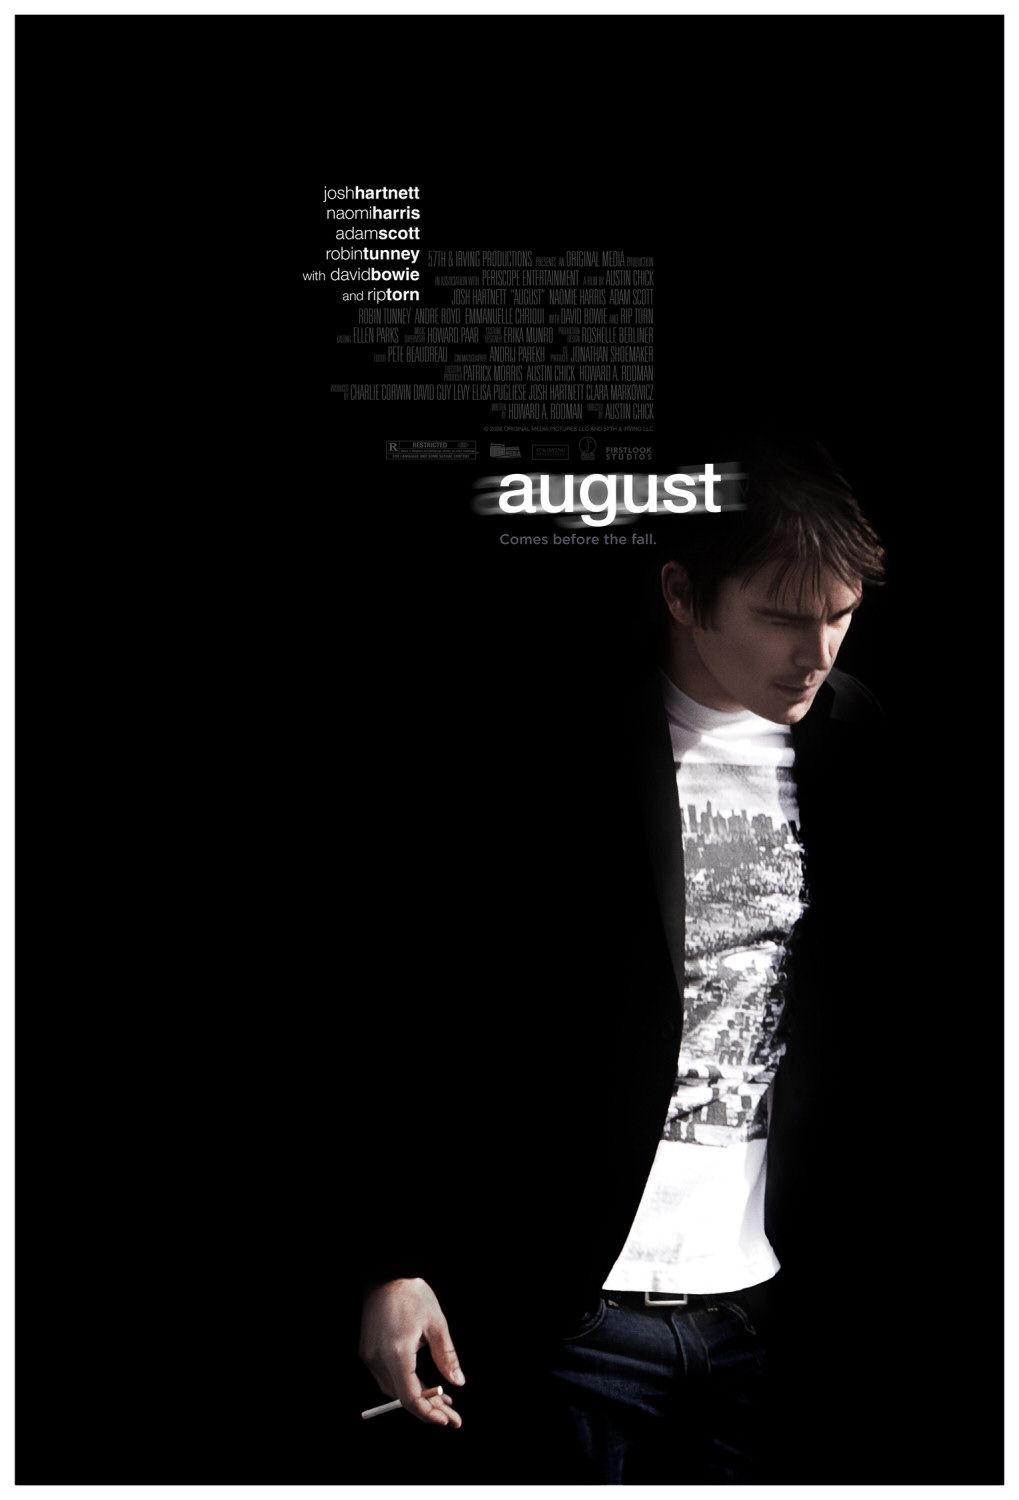 Extra Large Movie Poster Image for August (#2 of 2)